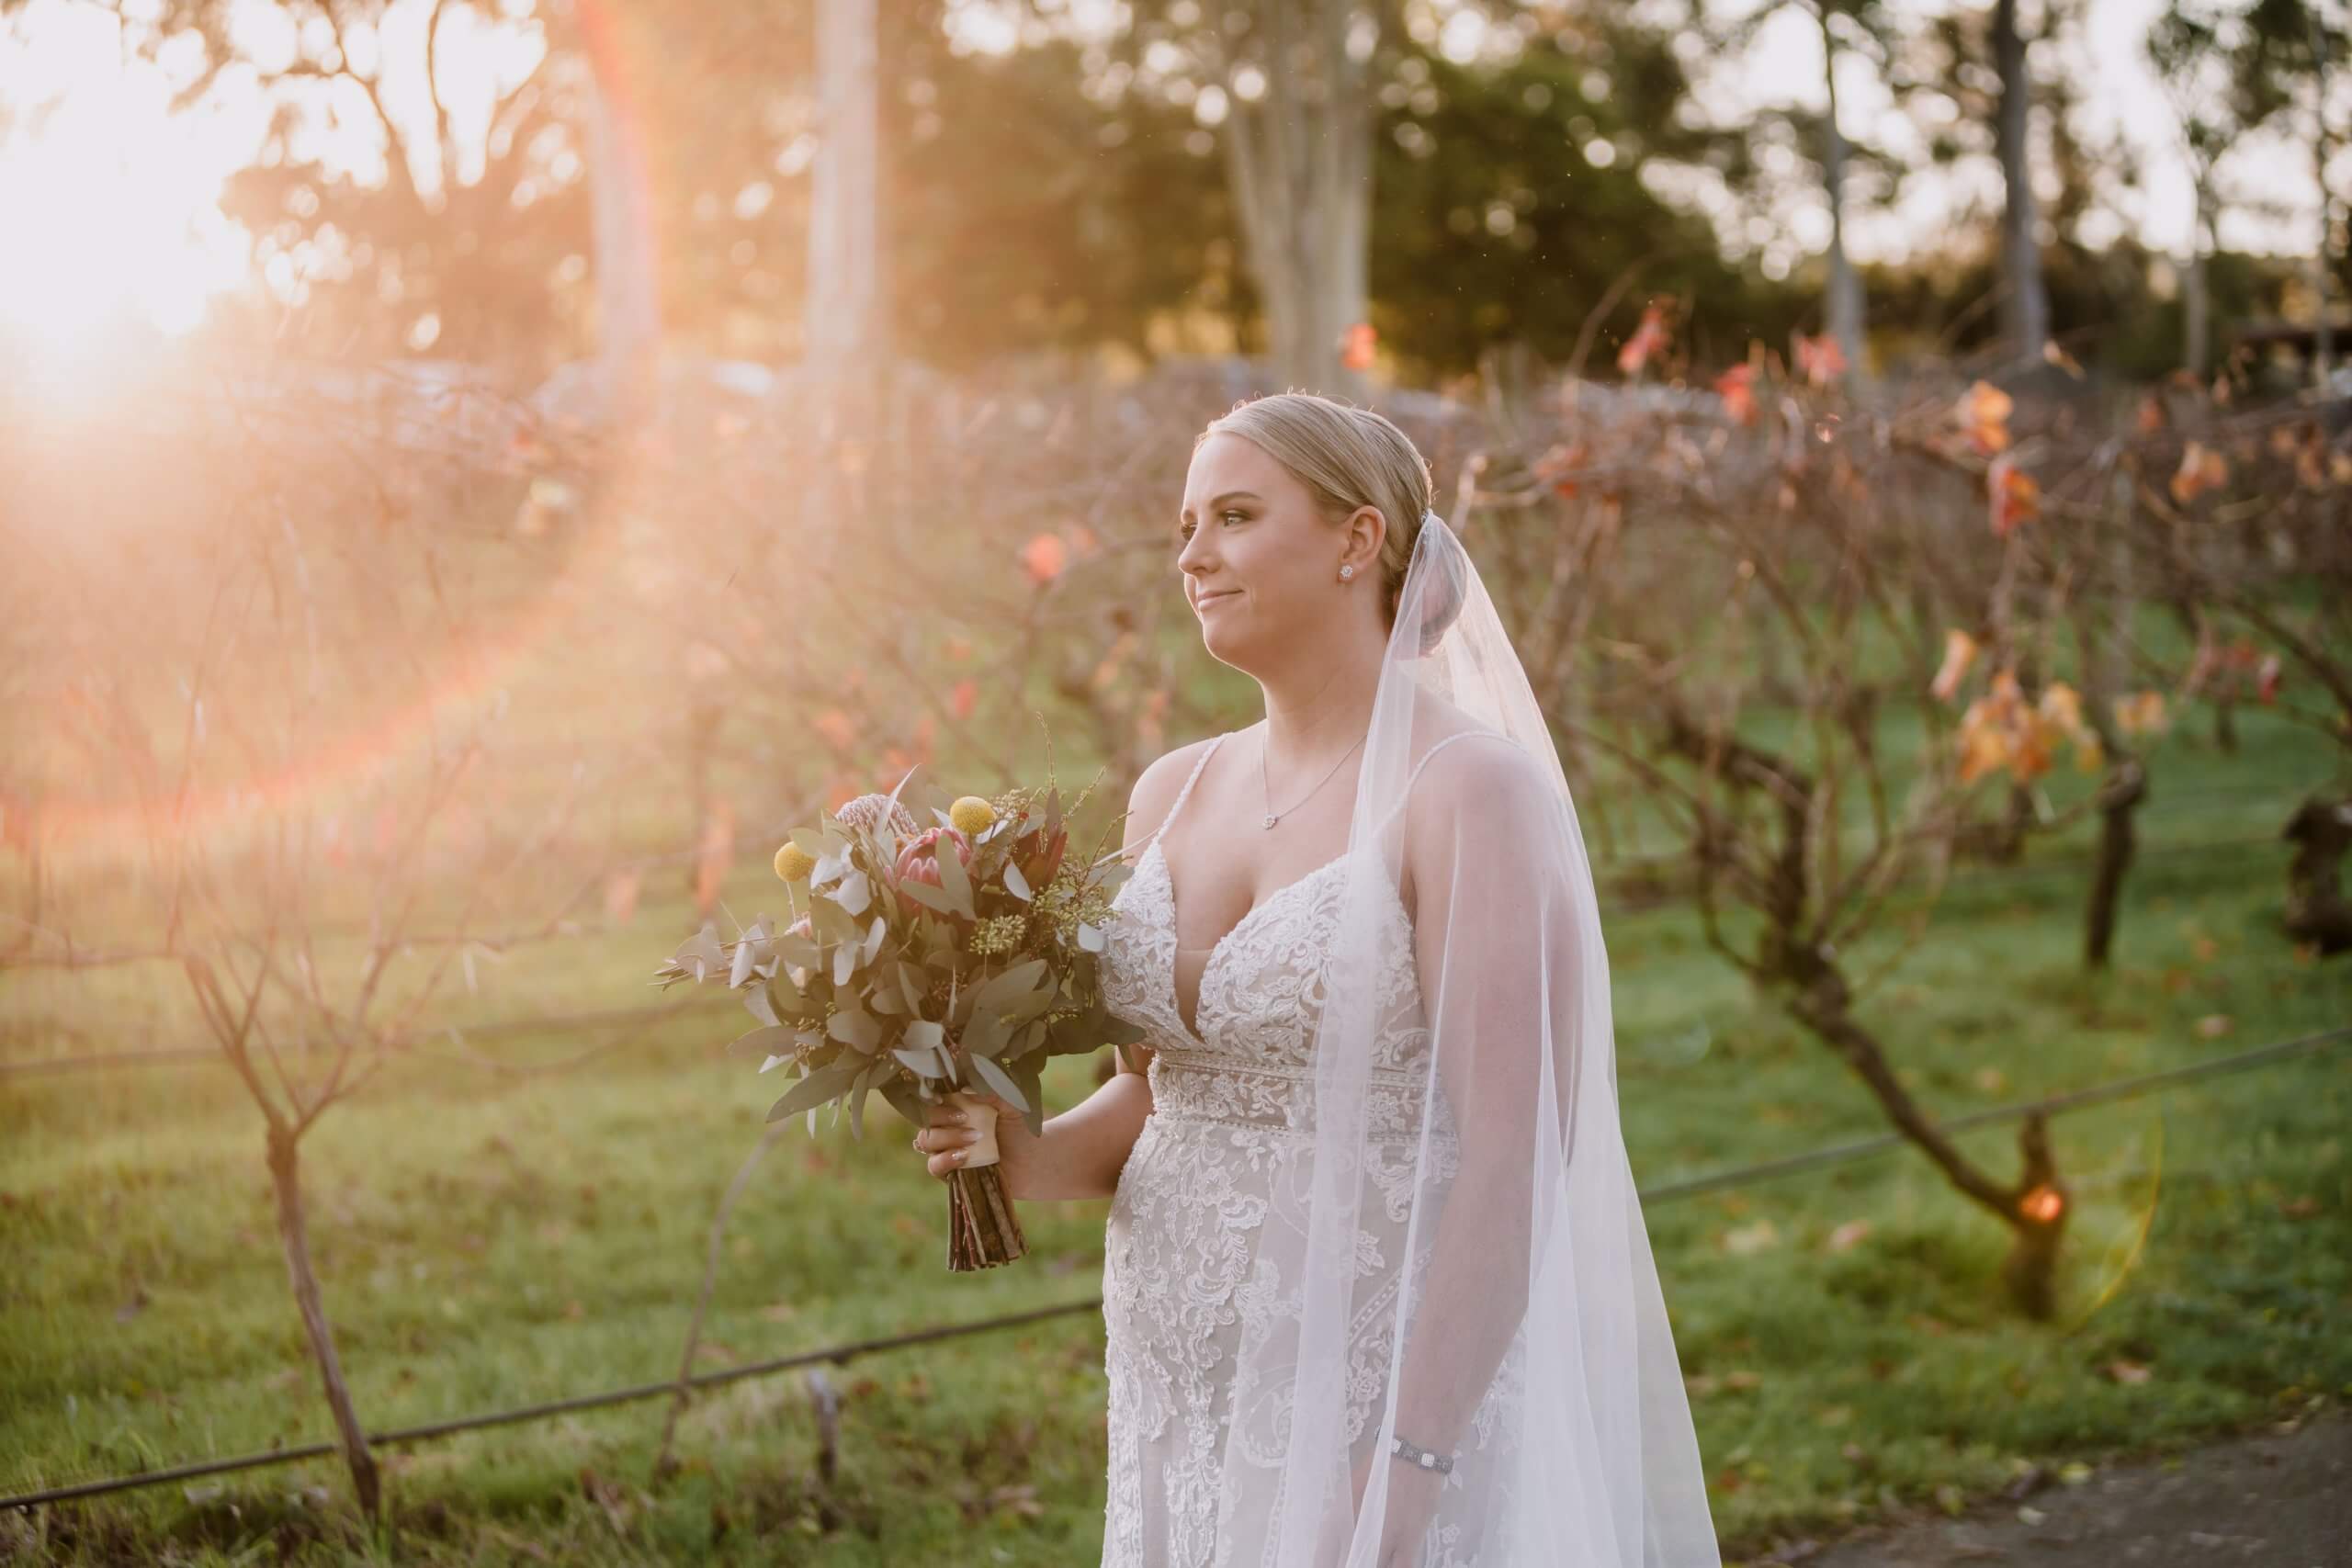 Bride looks beautiful while standing under the glow of the setting sun.